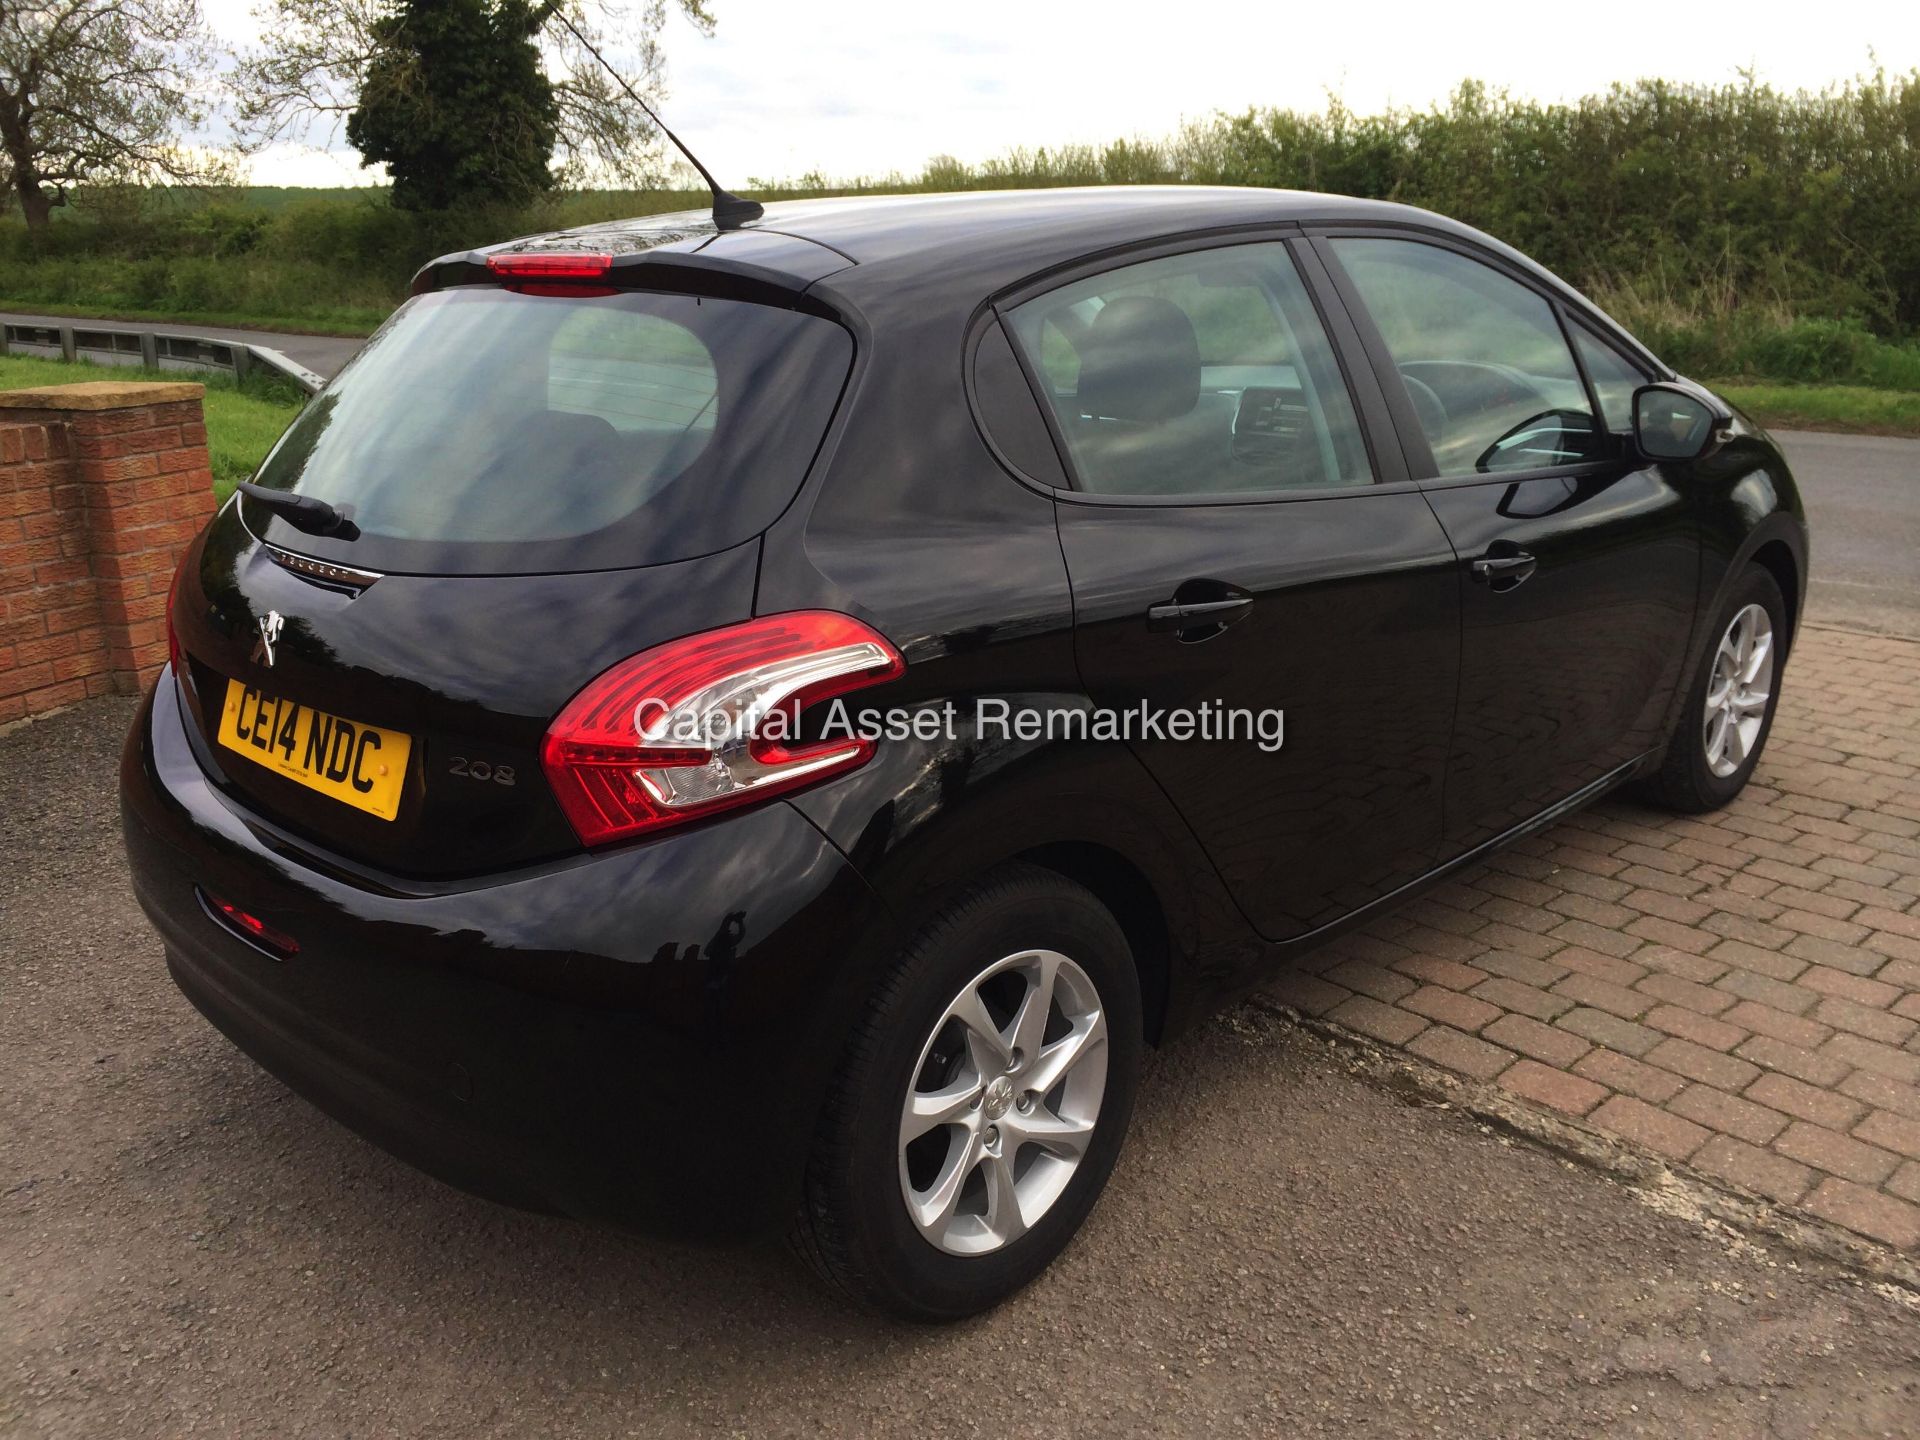 PEUGEOT 208 1.4 HDI 'ACTIVE' 5 DOOR (2014 - 14 REG)  **OWNED BY PEUGEOT FROM NEW** - Image 5 of 15